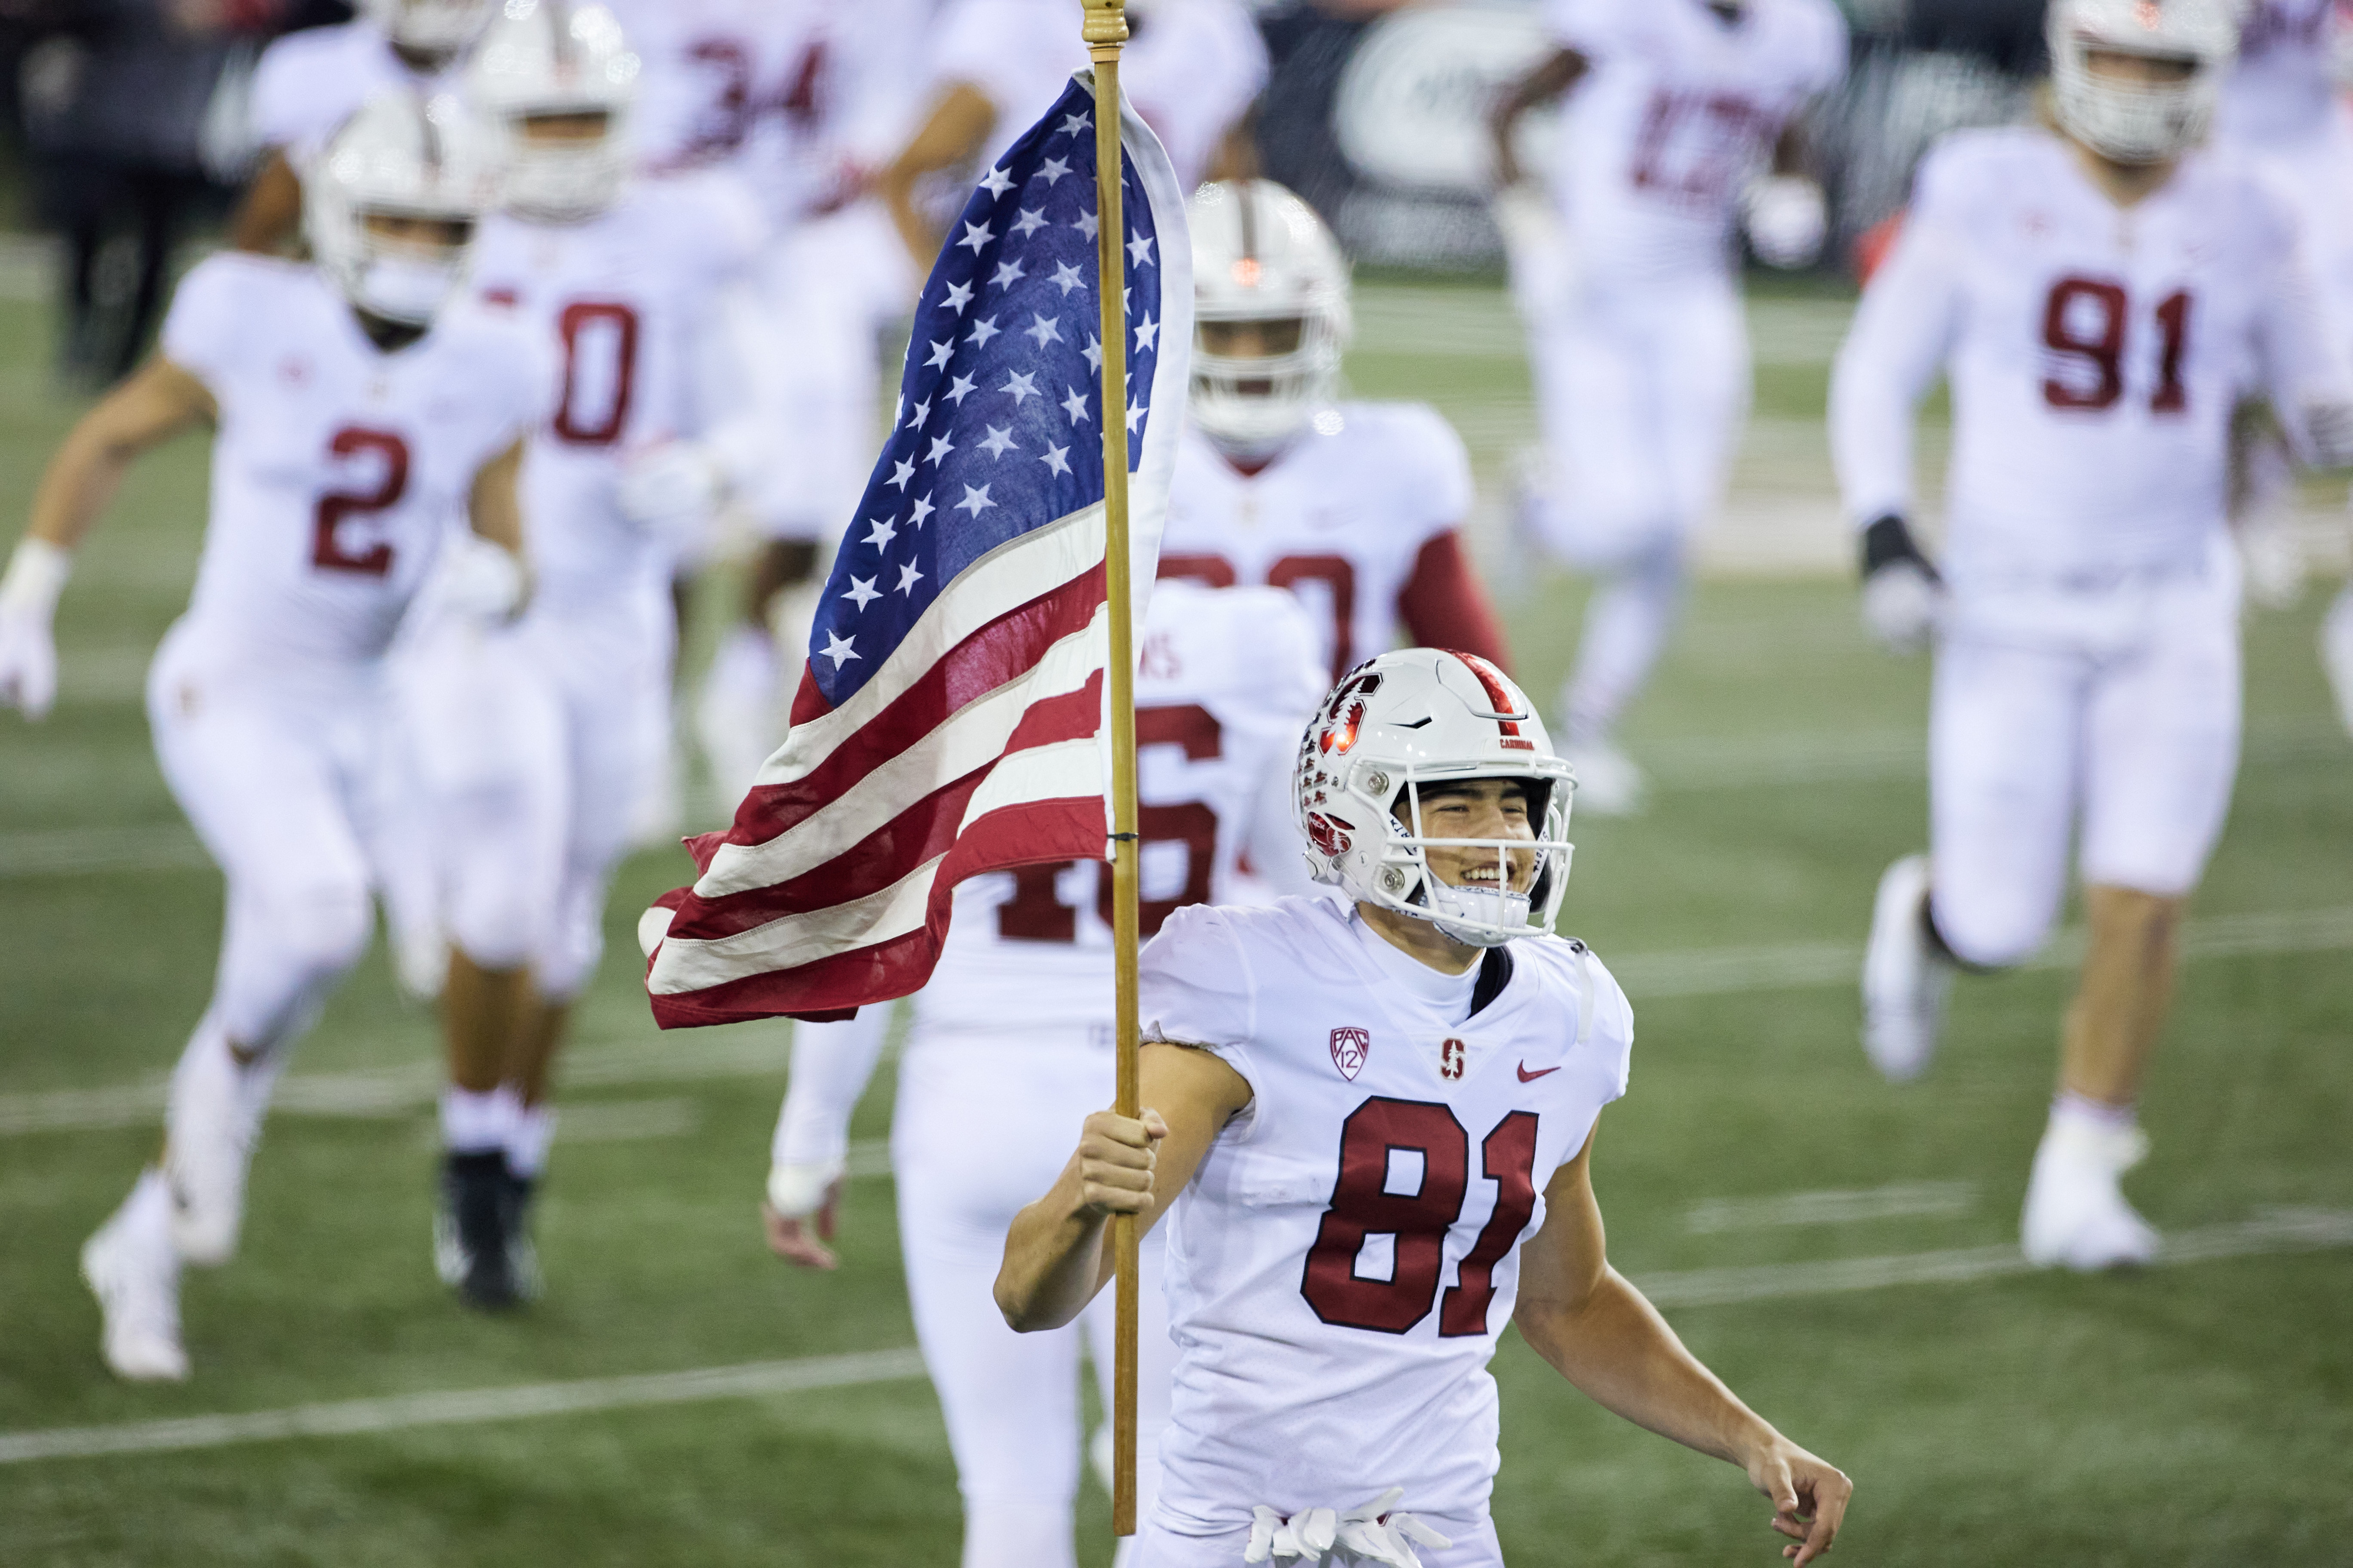 20 join Stanford Football in 2021 recruiting class The Stanford Daily